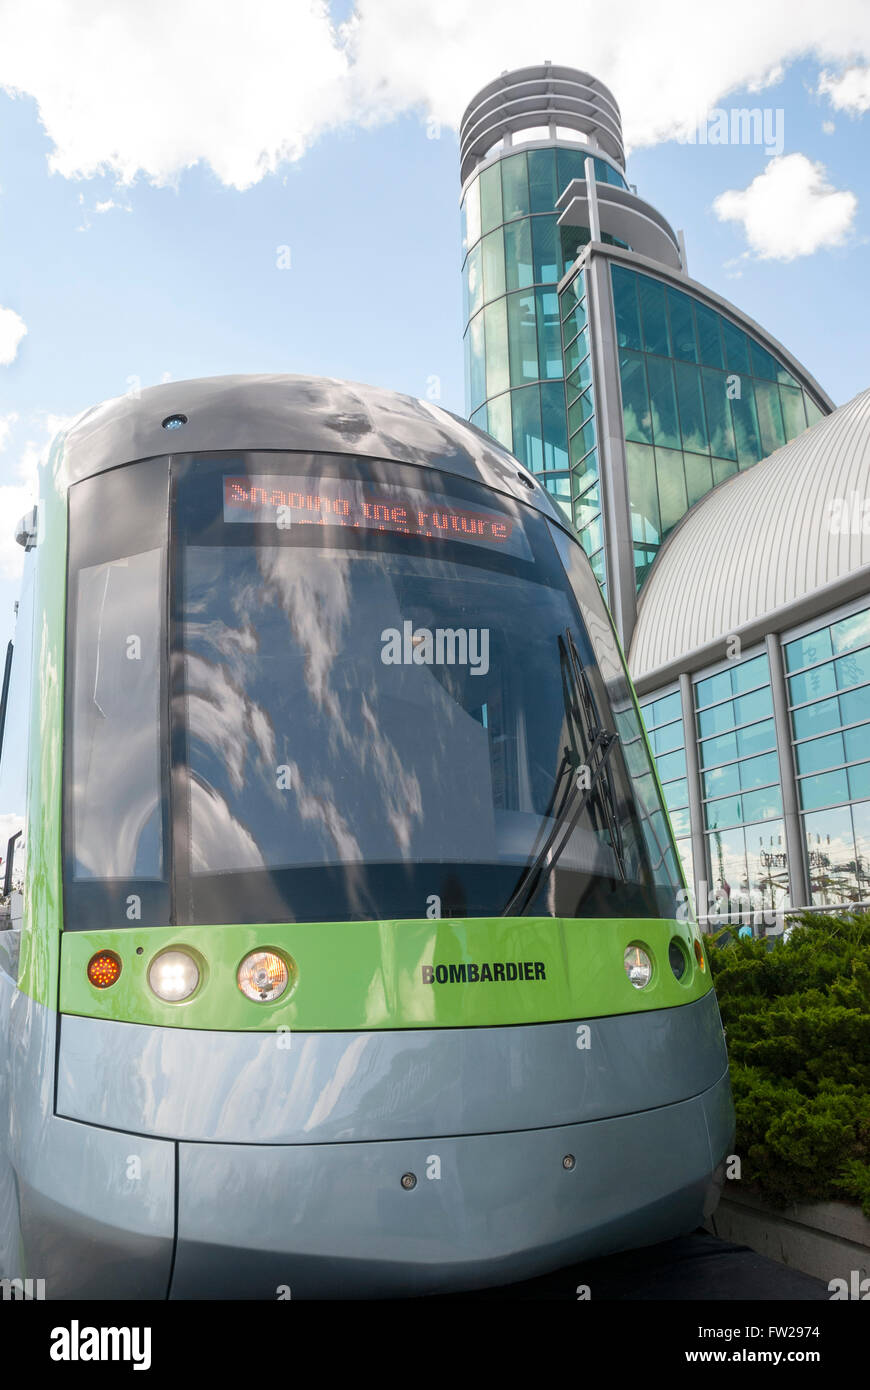 A mock up of Bombardier's Flexity Outlook, an example of Toronto's planned new streetcar fleet at the CNE in Toronto Canada. Stock Photo